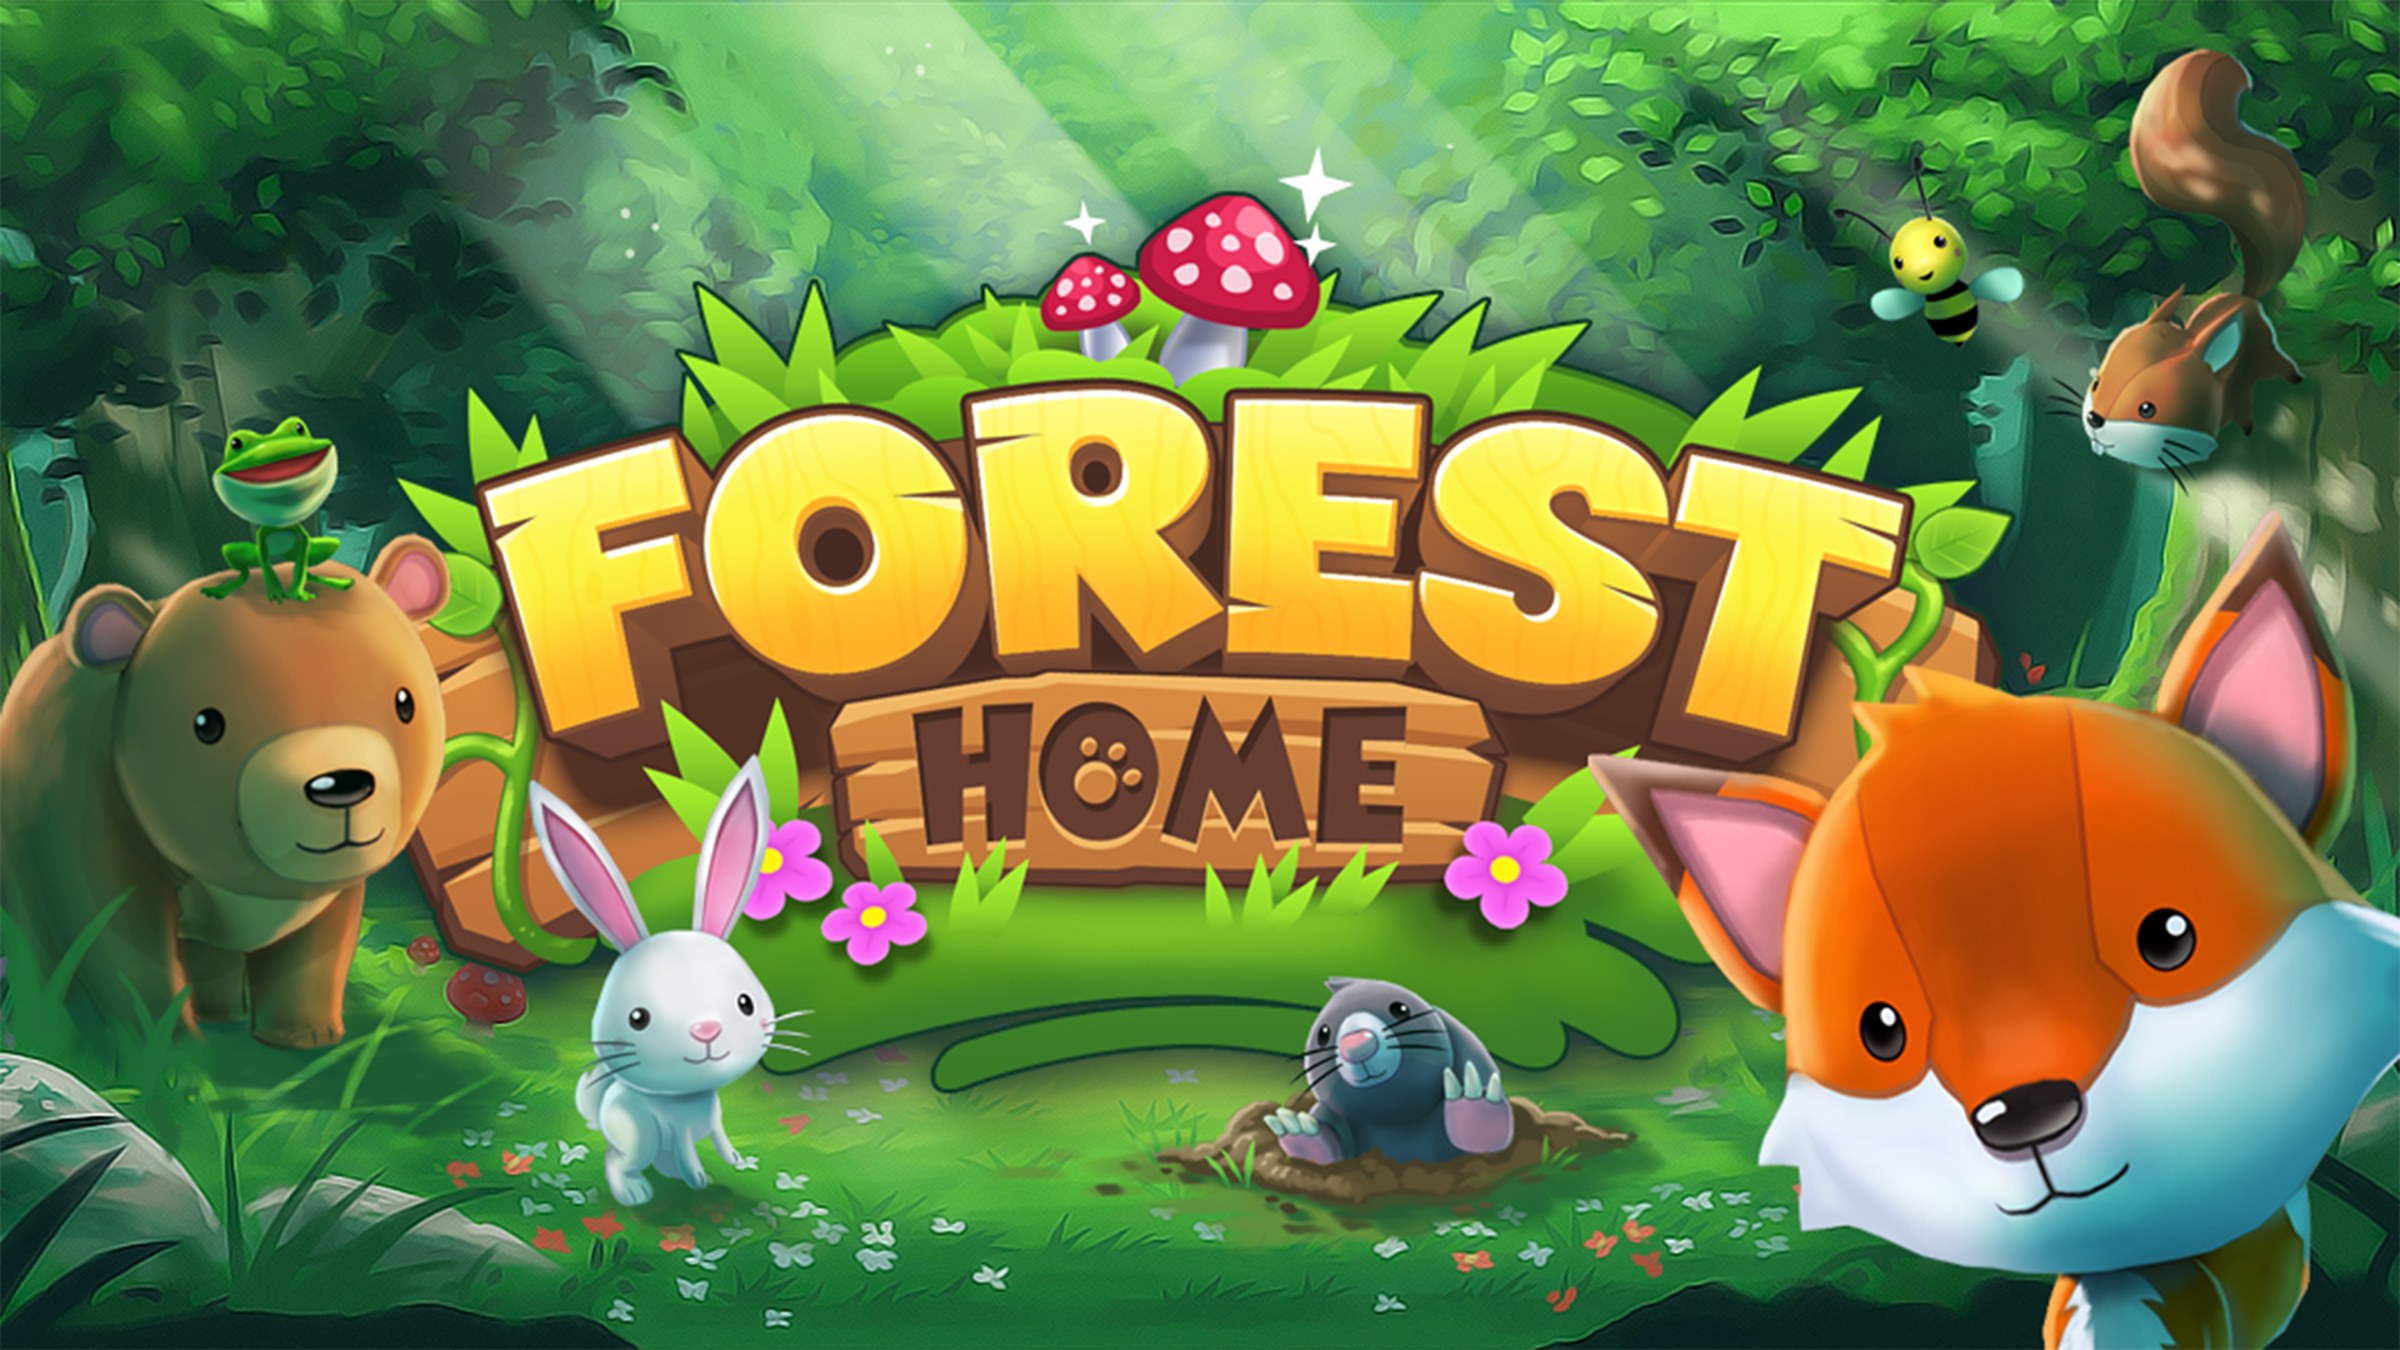 Forest home. Forest Home игра. My Forest Home игра андроид. Games like a my_Forest_Home. Как пройти Forest Home.